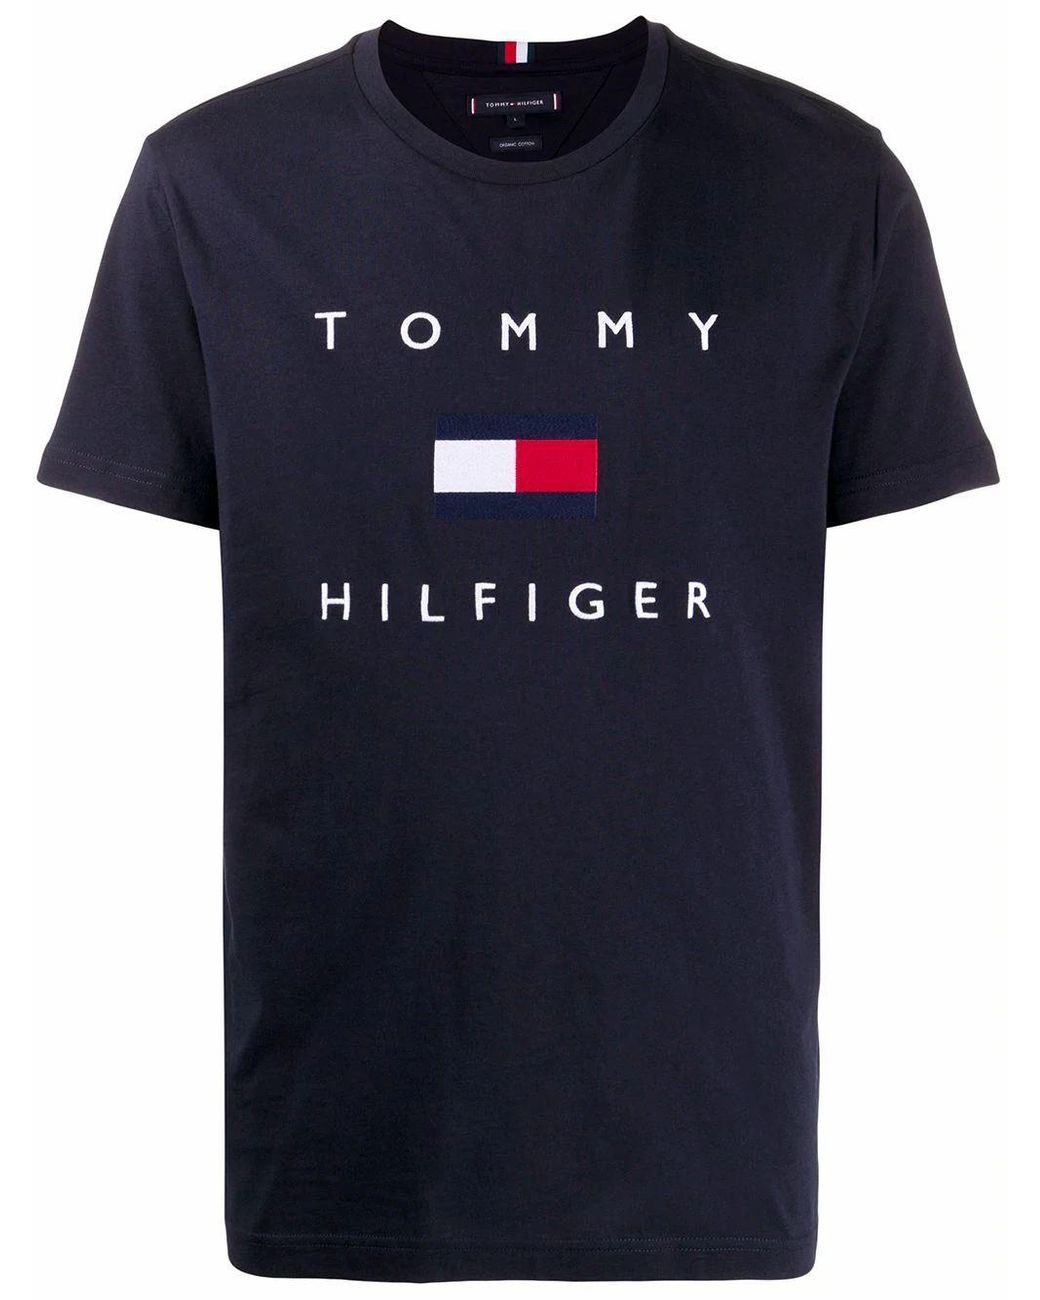 Tommy Hilfiger Cotton T-shirt in Blue for Men - Lyst